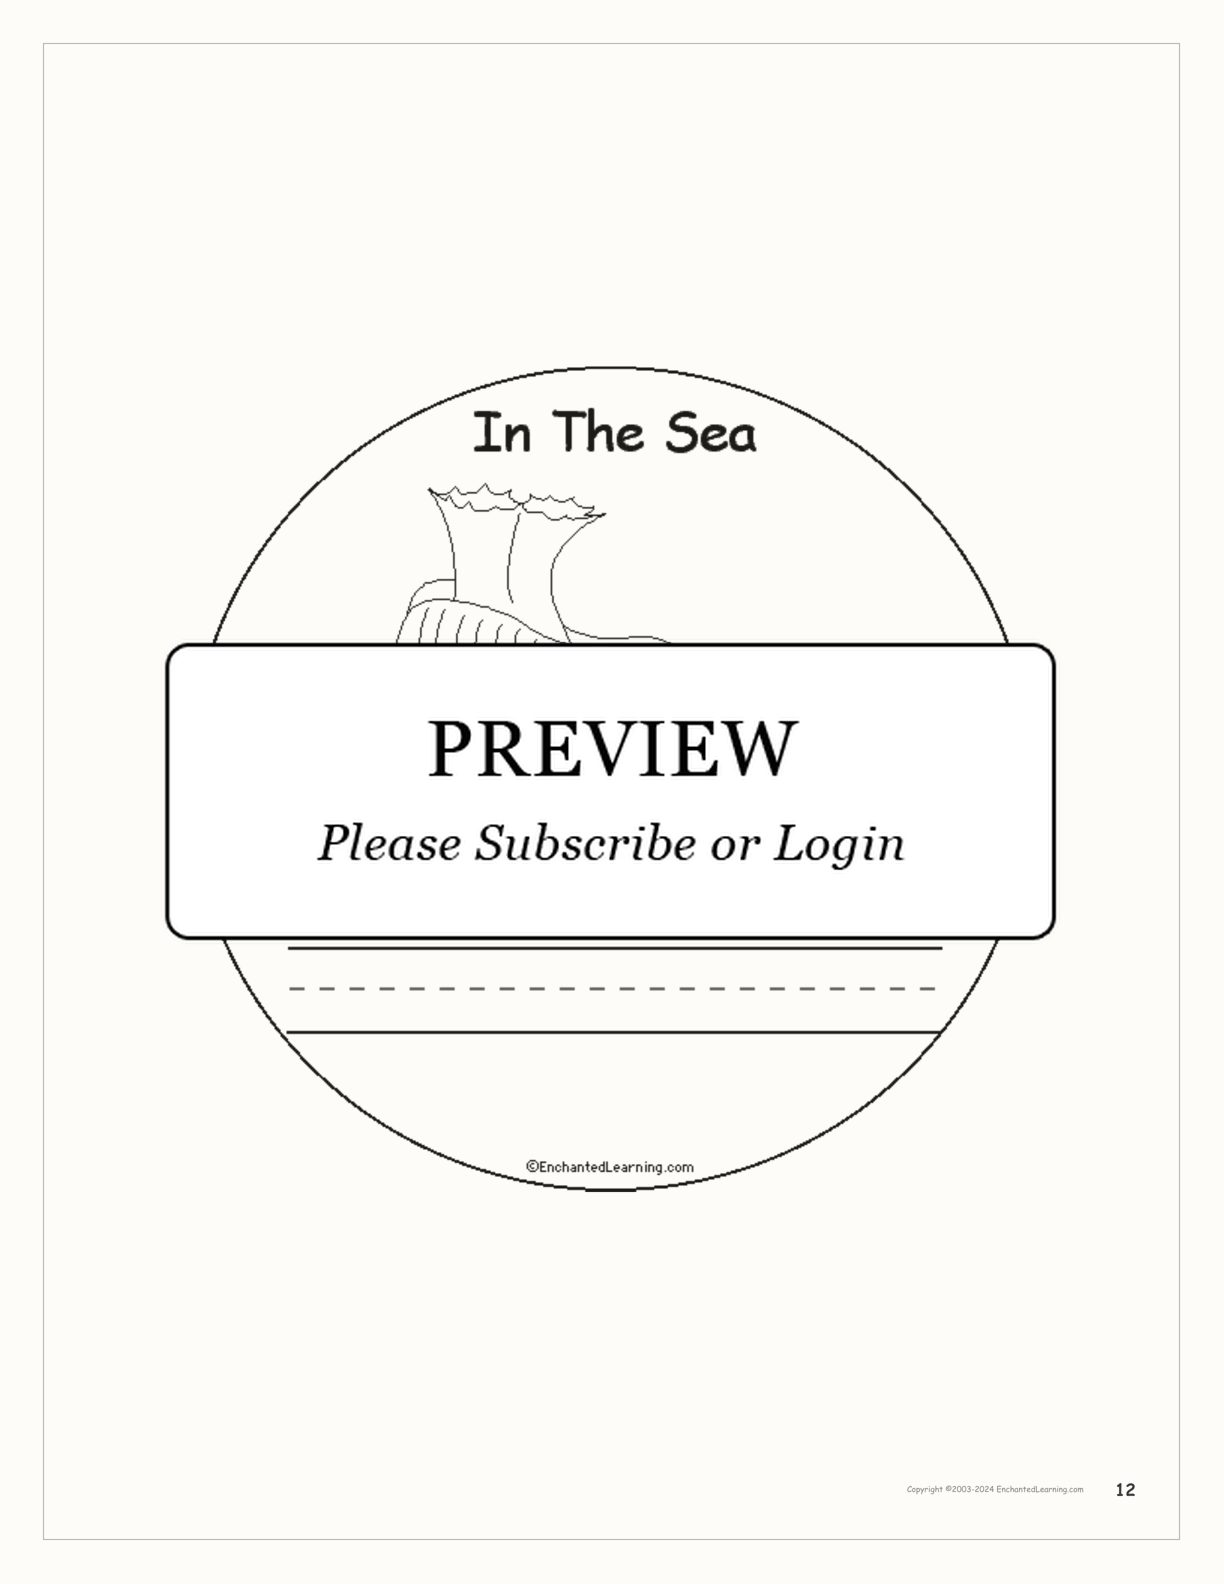 In The Sea: Early Reader Book interactive printout page 12